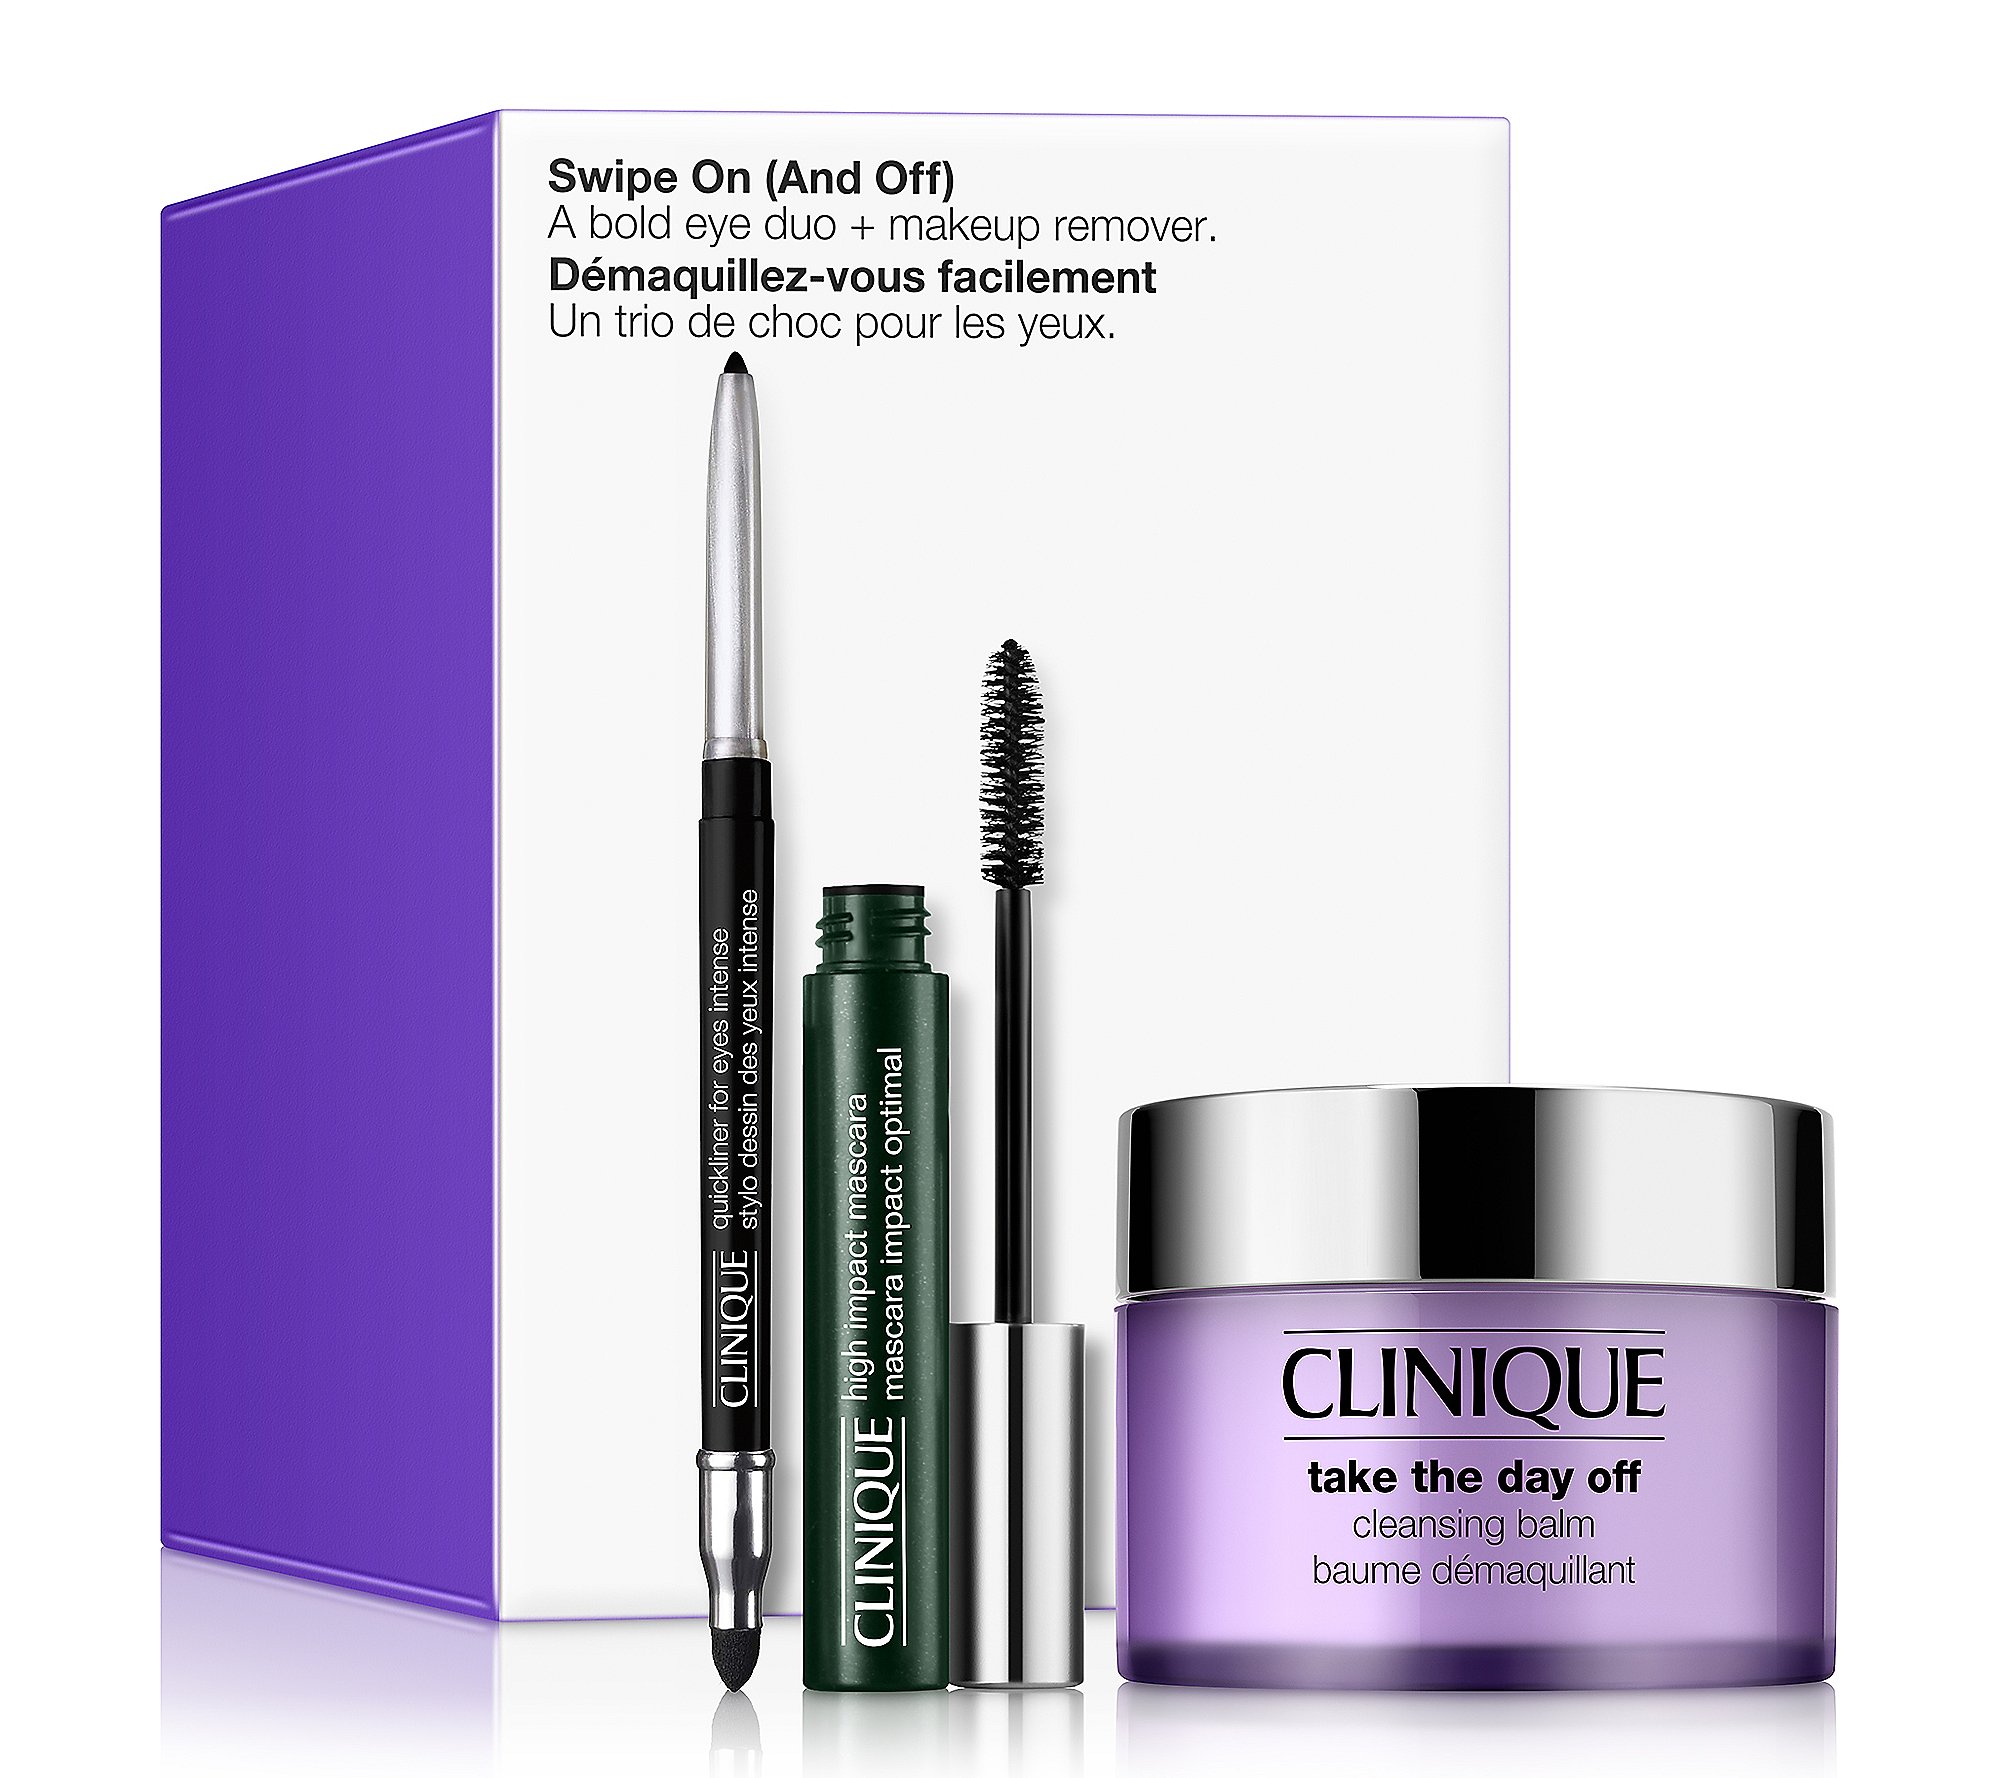 Clinique Swipe On (and Off) Eye Set